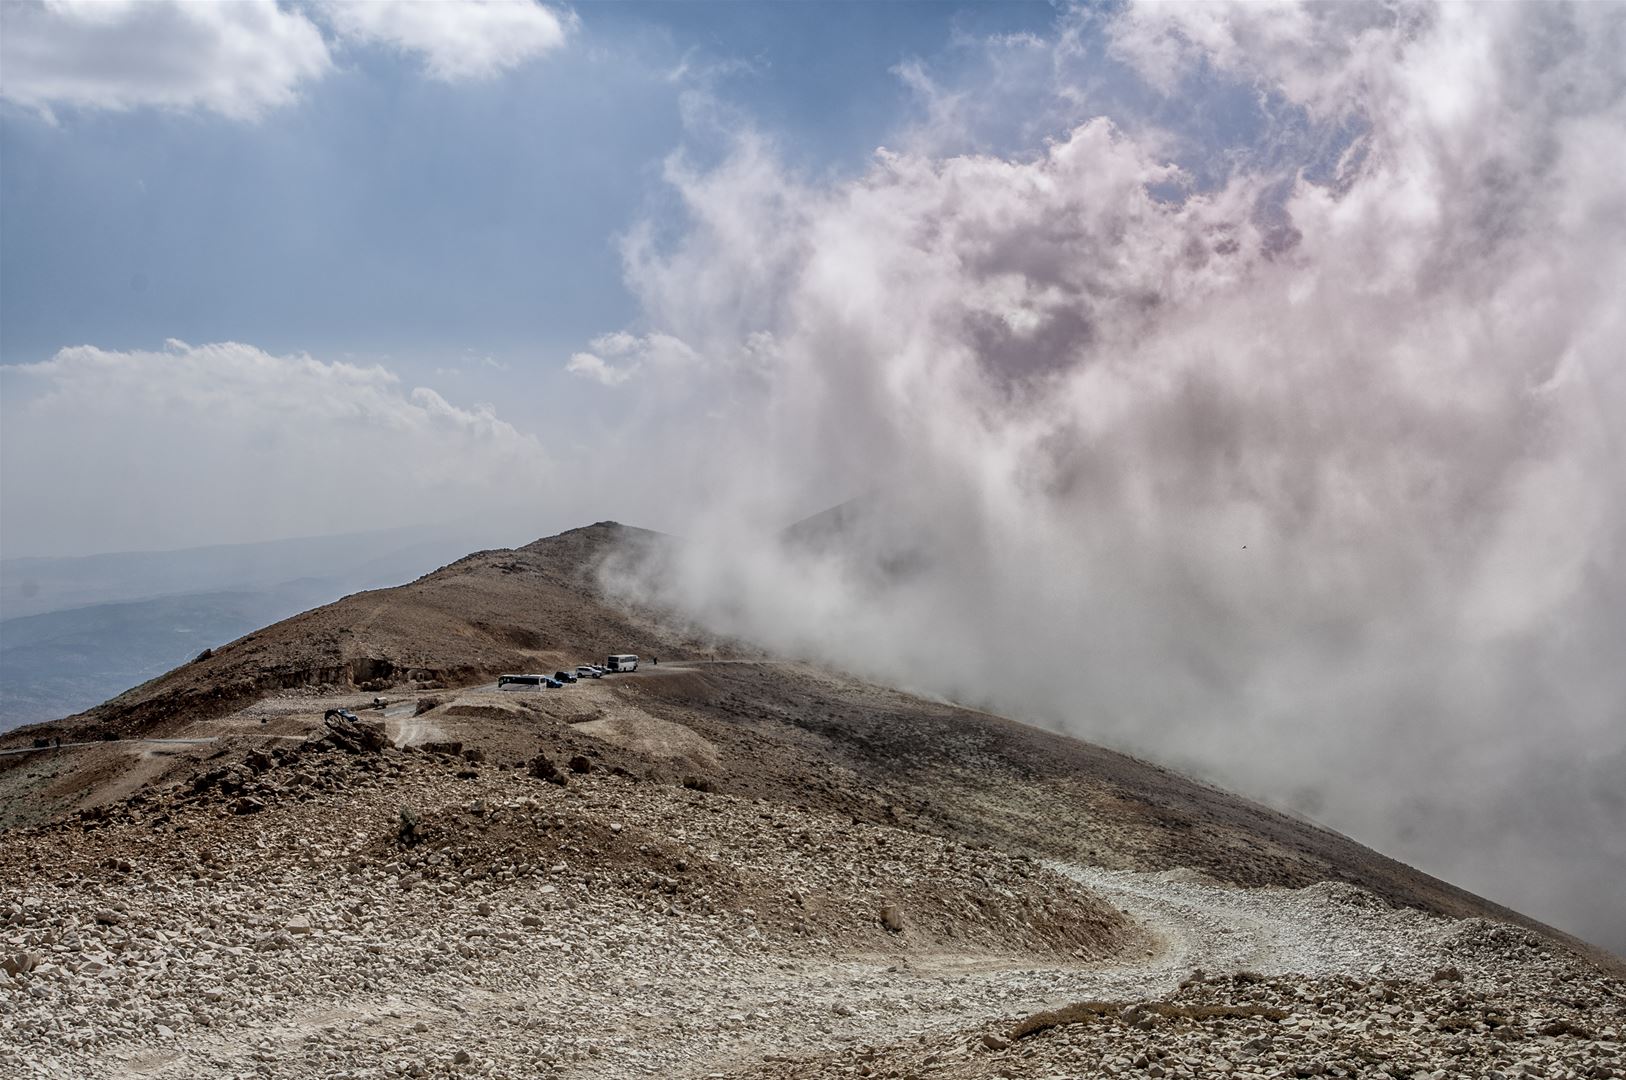 Clouds Attacking the Mountains (North Lebanon)